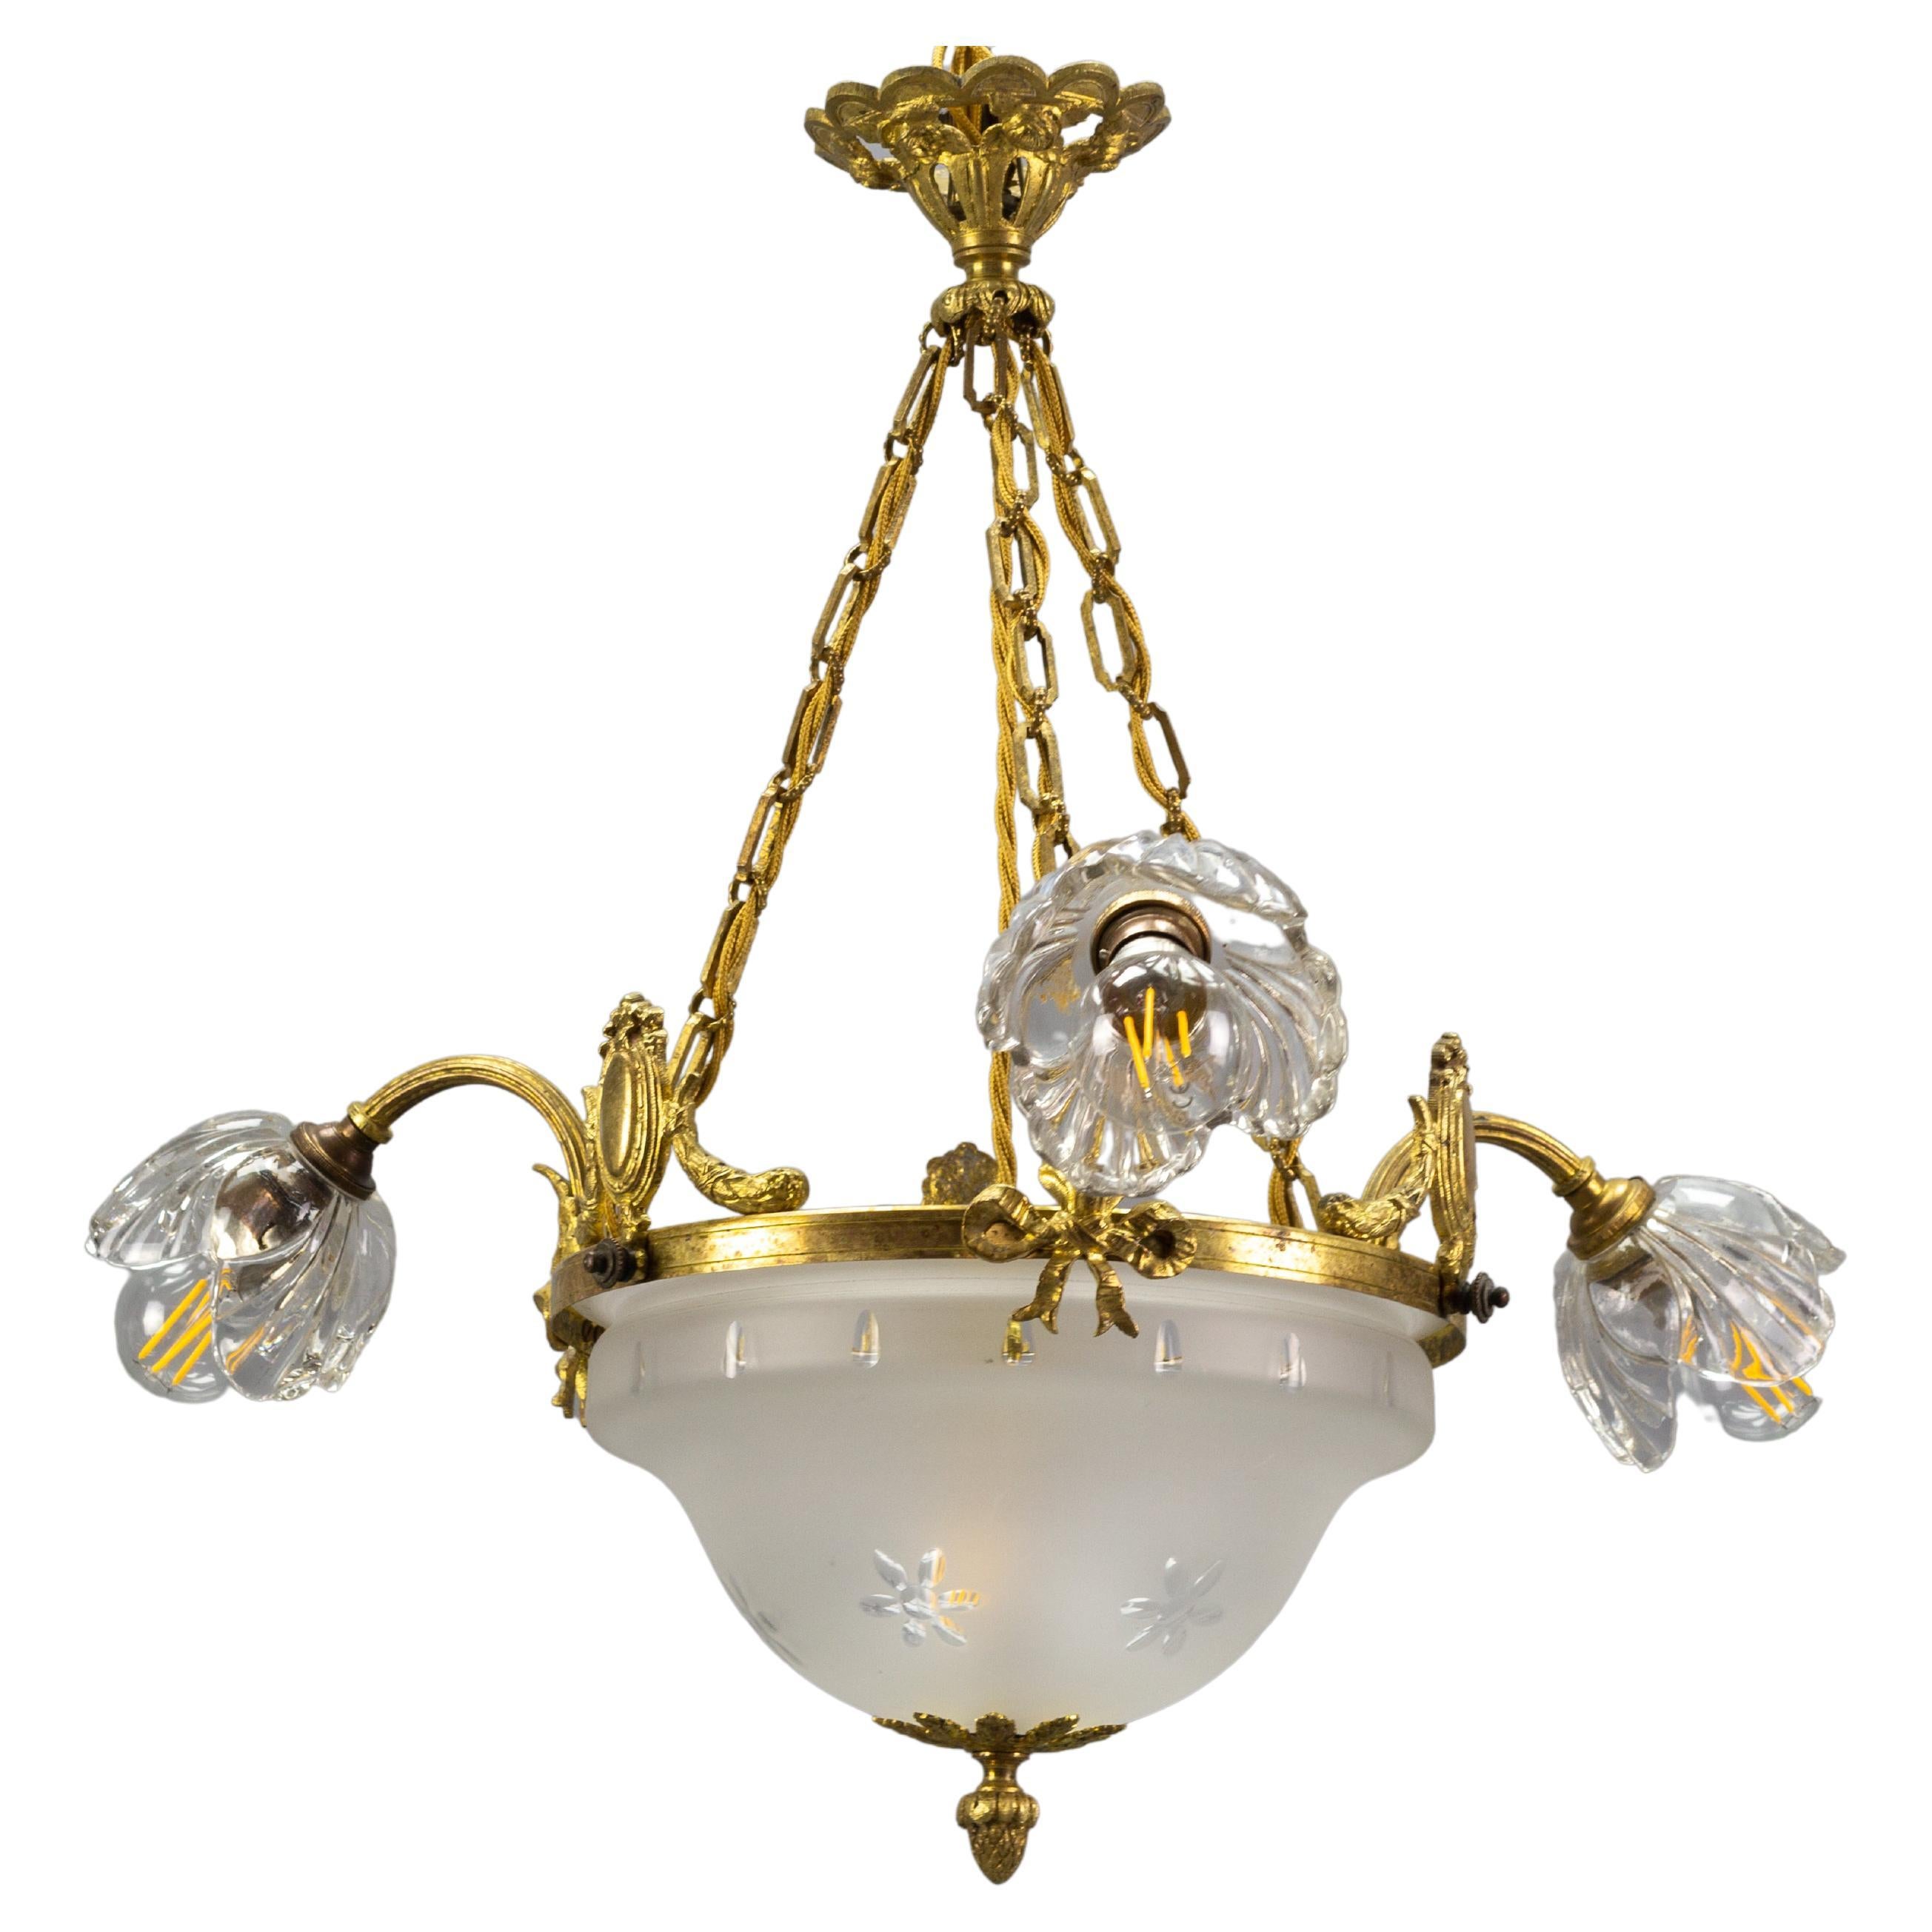 French Neoclassical Style Gilt Bronze and Glass Four-Light Chandelier